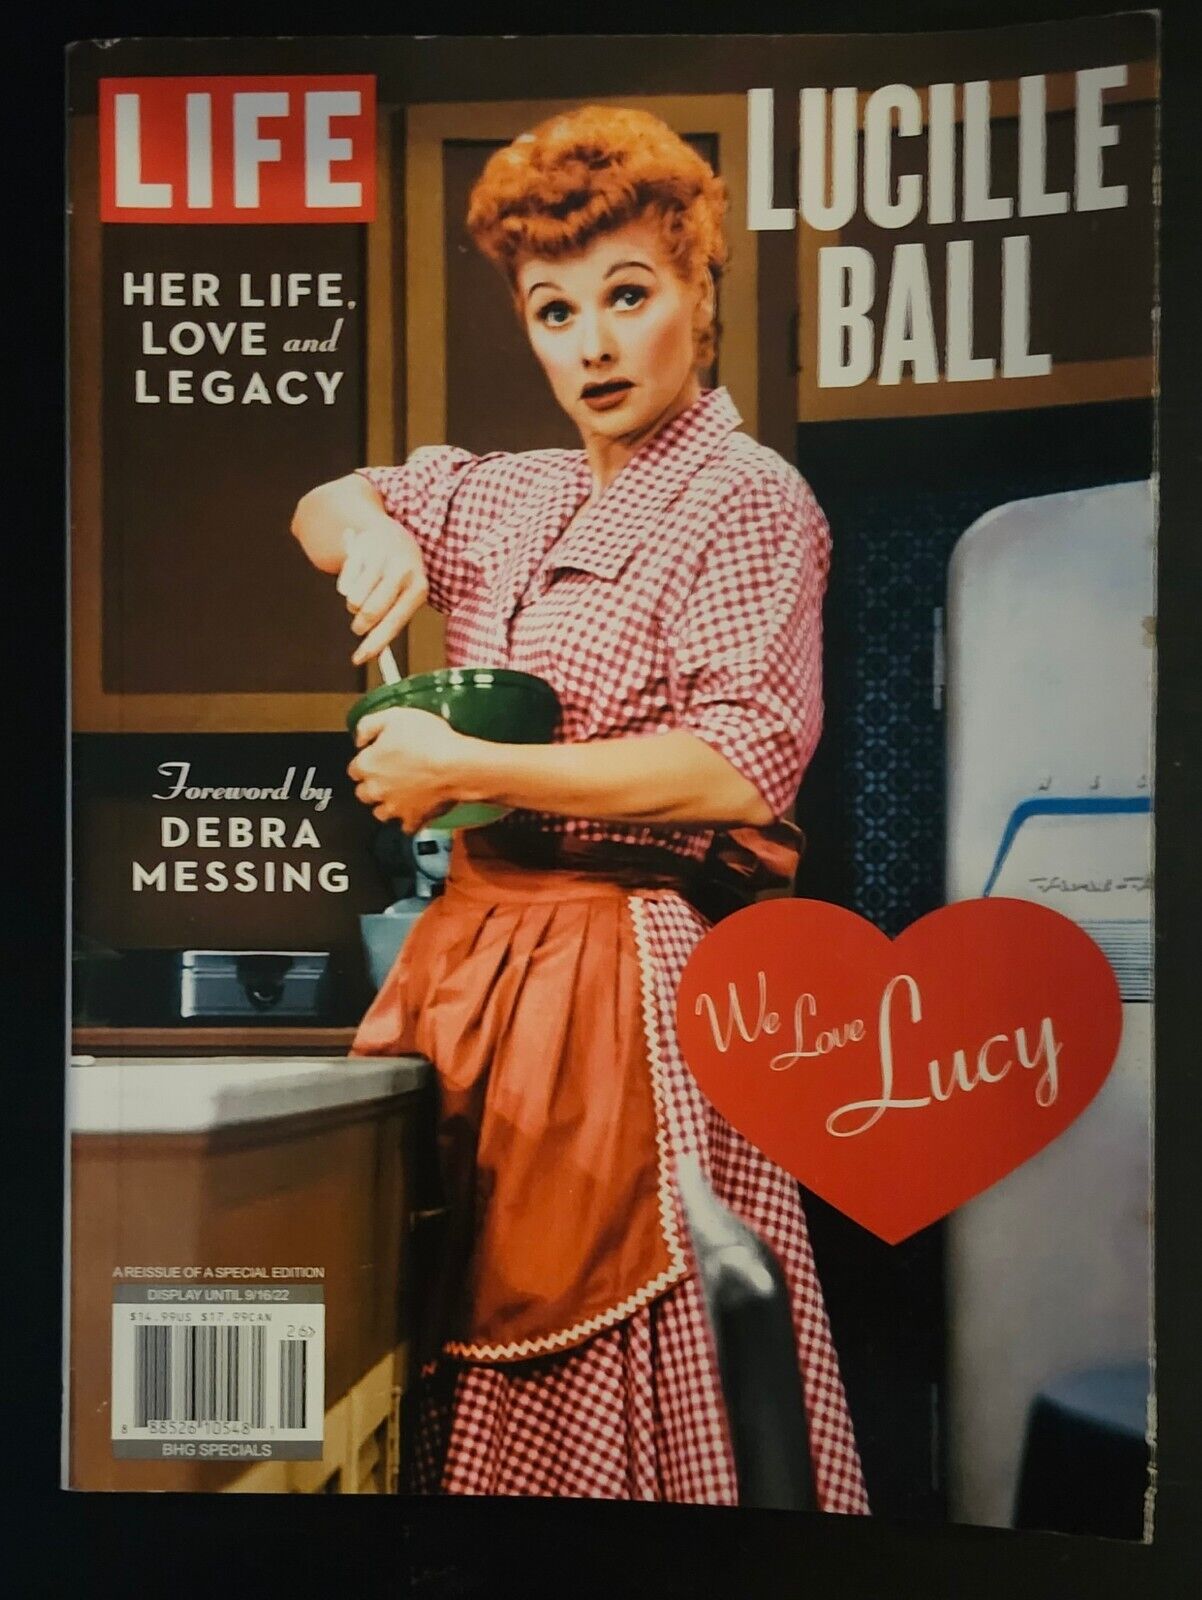 LUCILLE BALL (I LOVE LUCY) 11x14 Glossy Photo